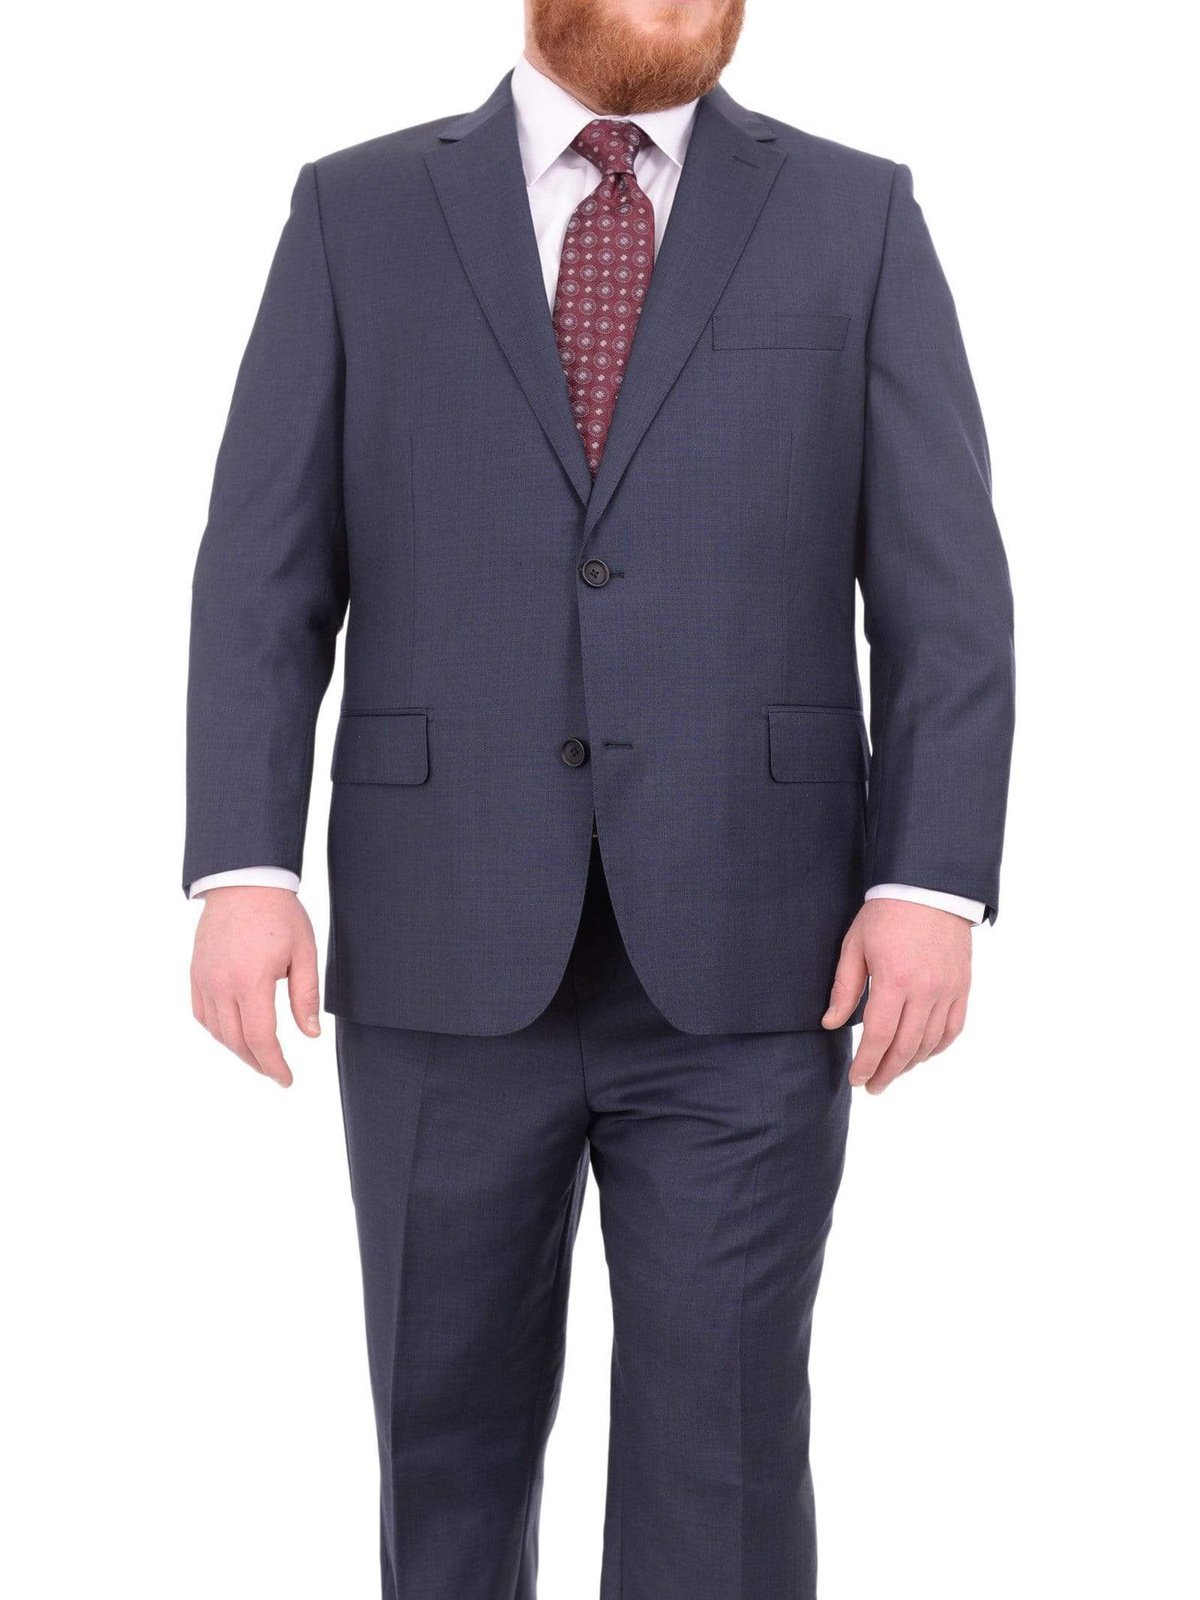 Label M TWO PIECE SUITS 40S Mens Portly Fit Heather Blue Two Button Wool Blend Suit